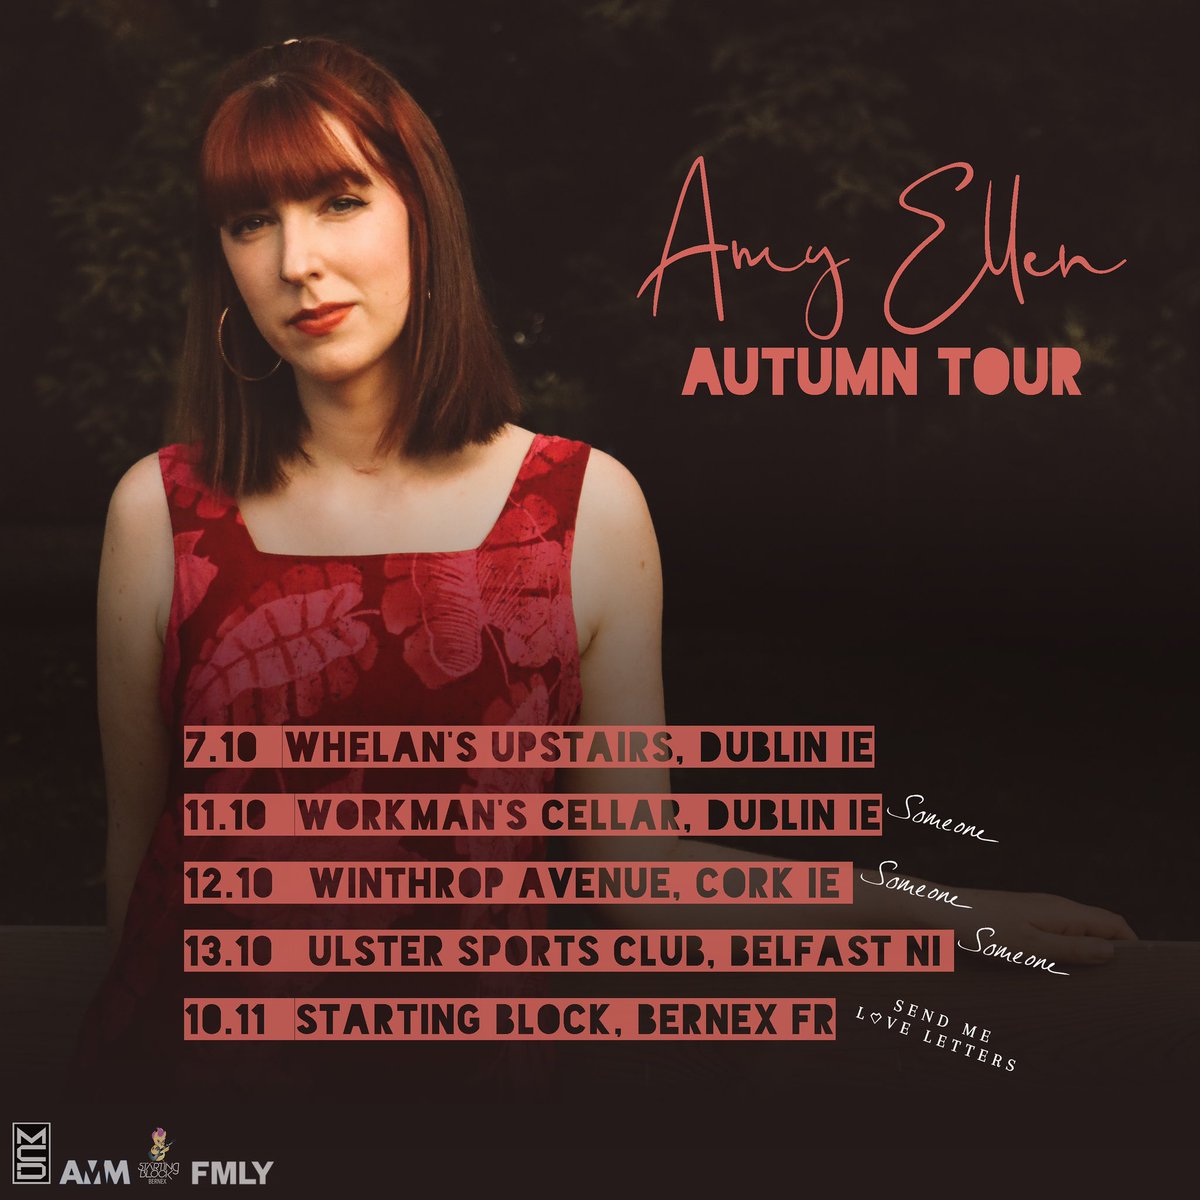 Autumn Tour Dates ❕❤️ Irish shows are coming up fast! So excited for my headline show @whelanslive followed by opening slots for @someonespictures !